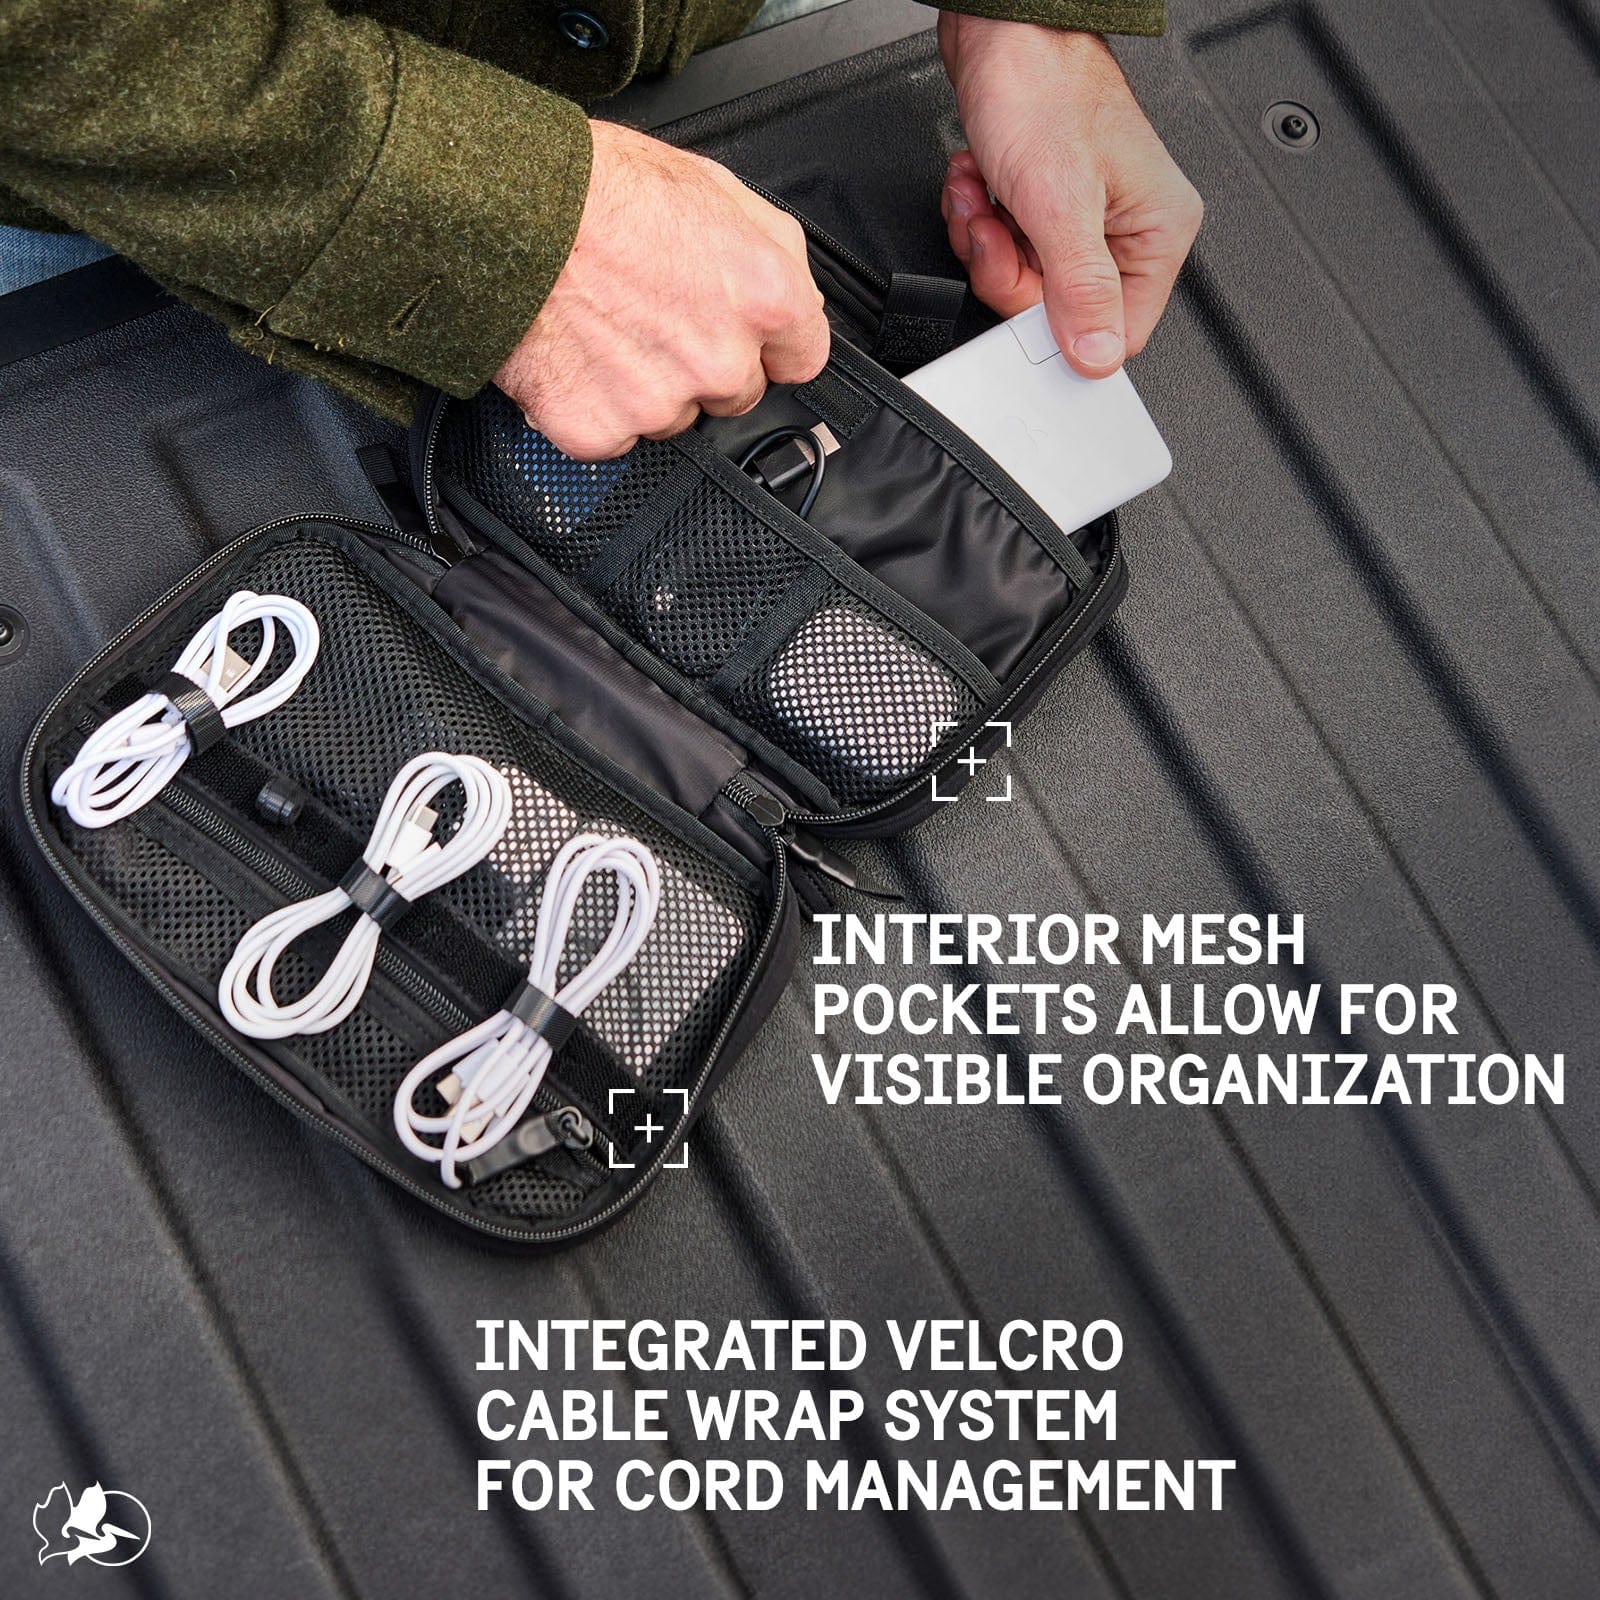 INTERIOR MESH POCKETS ALLOW FOR VISIBLE ORGANIZATION. INTEGRATED VELCRO CABLE WRAP SYSTEM FOR CORD MANAGEMENT